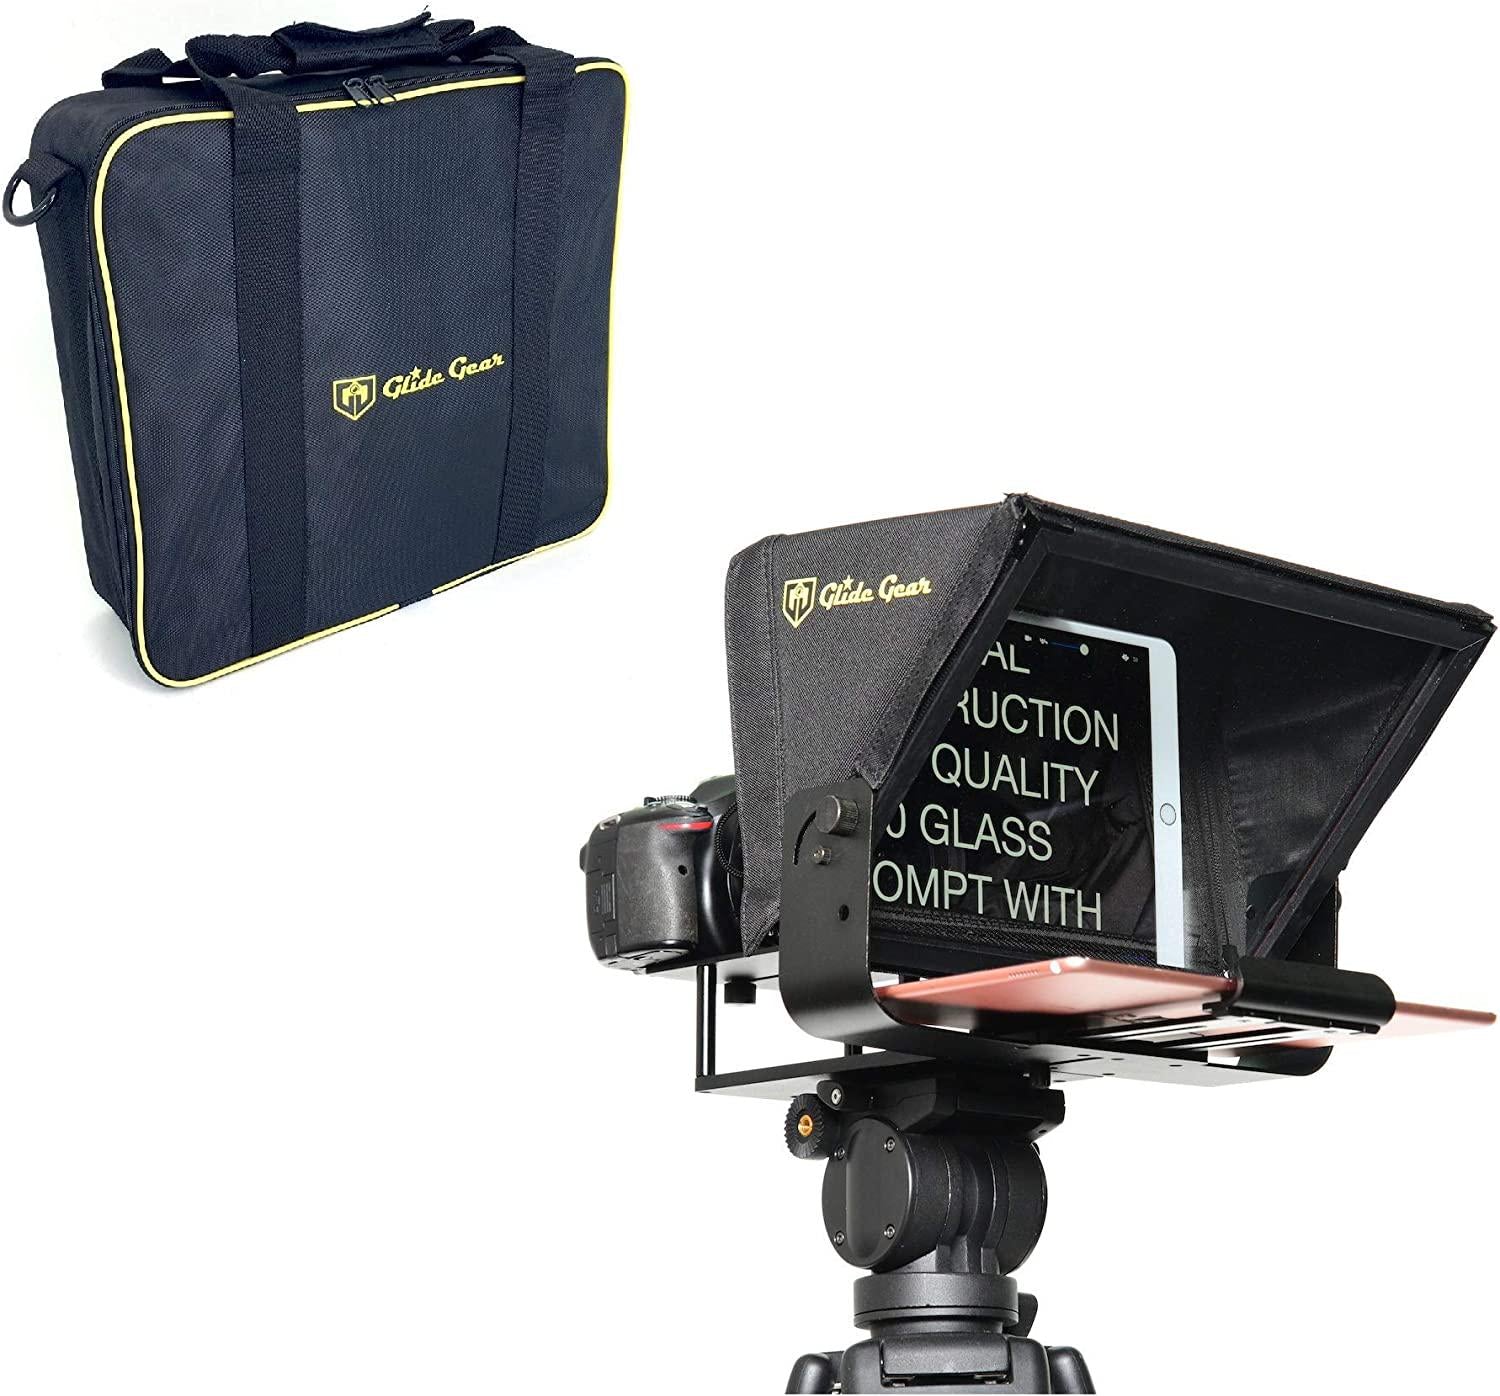 Glide Gear, Glide Gear TMP100 Adjustable iPad/ Tablet/ Smartphone Teleprompter Beam Splitter 70/30 Glass w/ Carry Case No Plastic All Metal / No Assembly Required